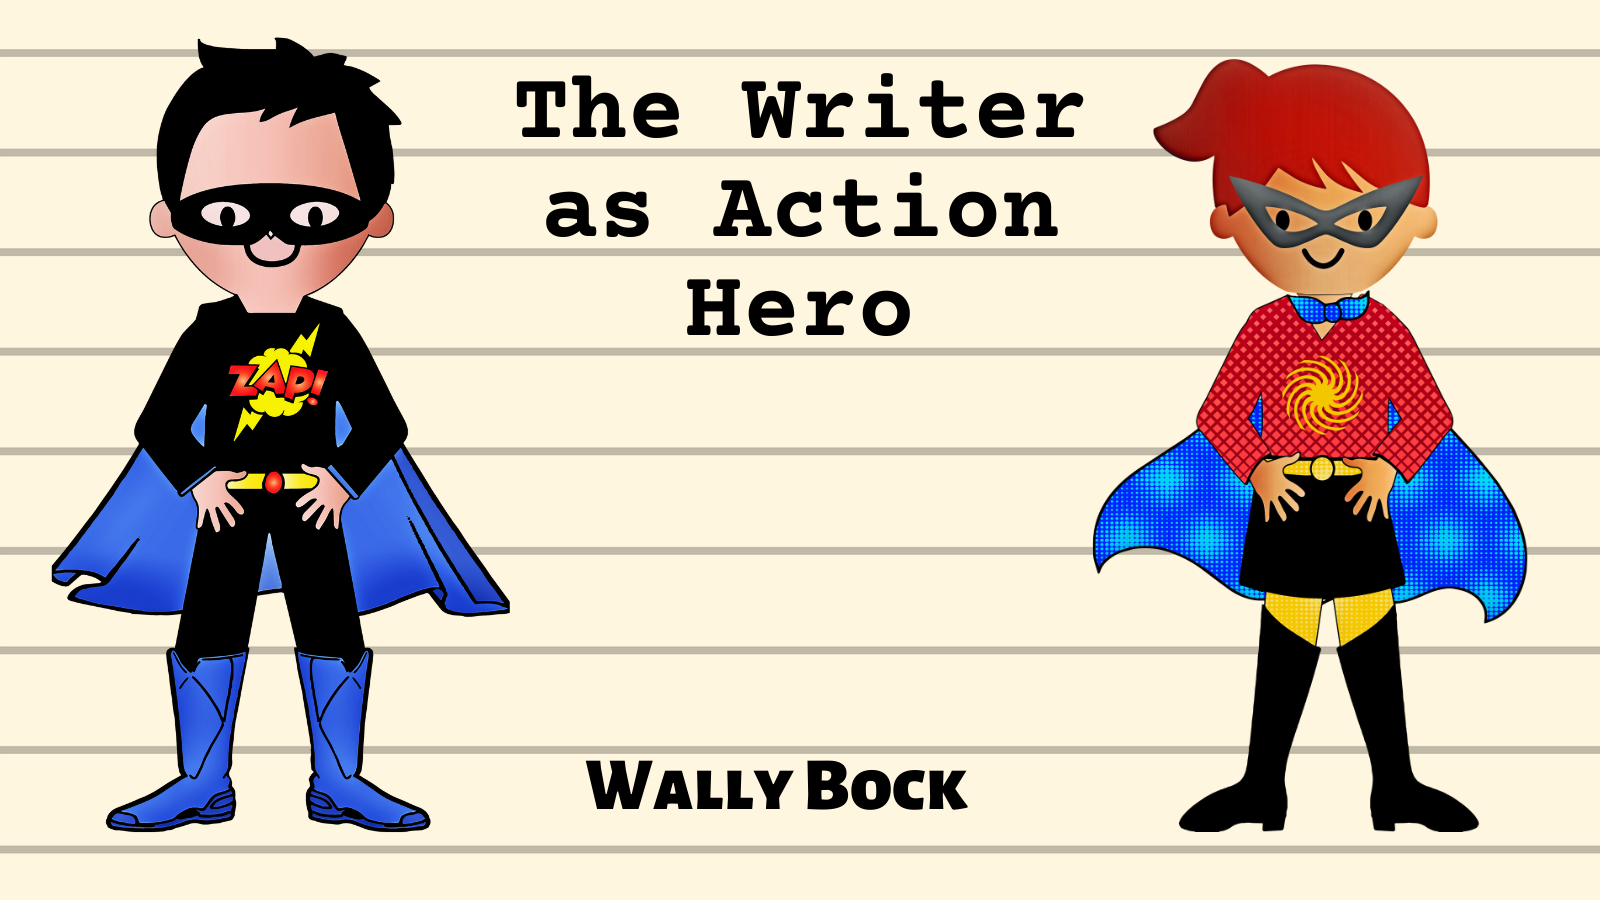 The Writer as Action Hero